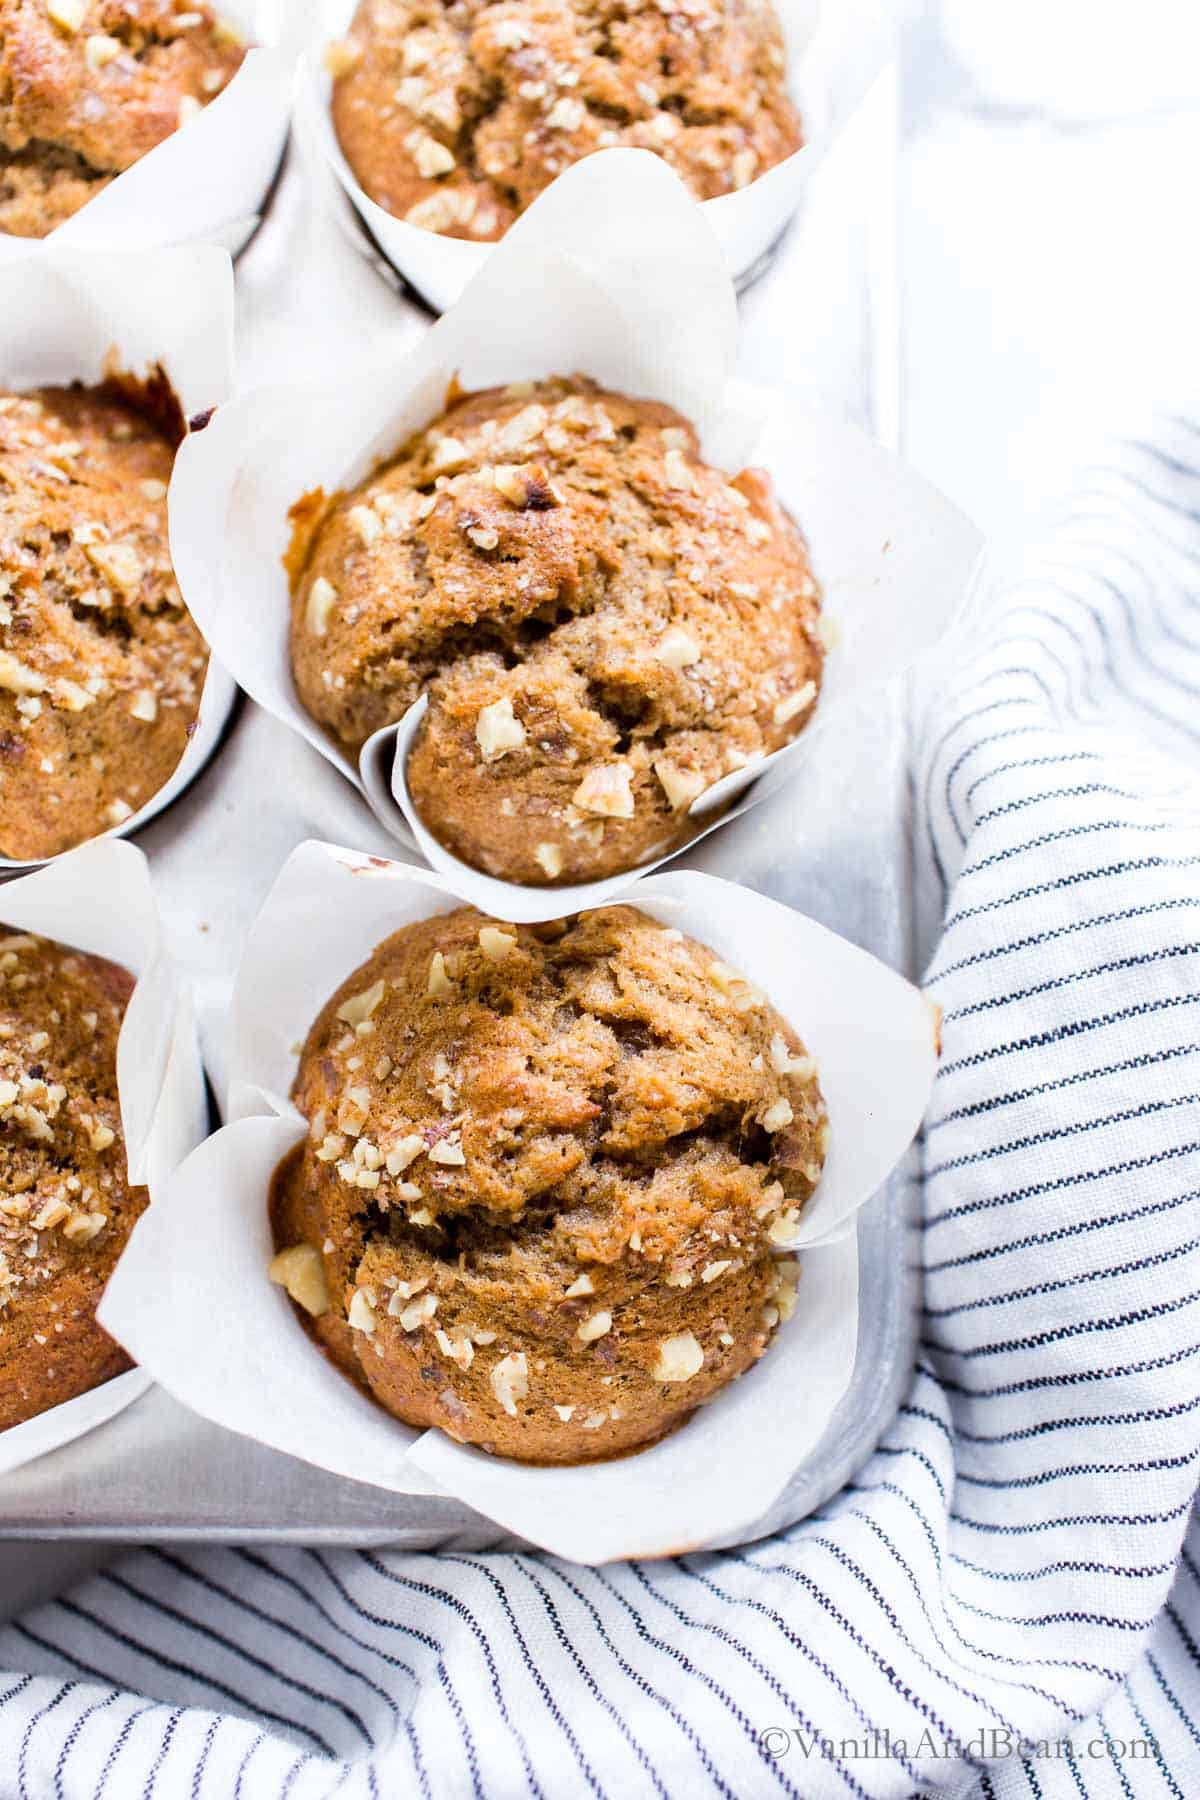 Oatmeal muffins in a muffin tin on a white tablecloth.